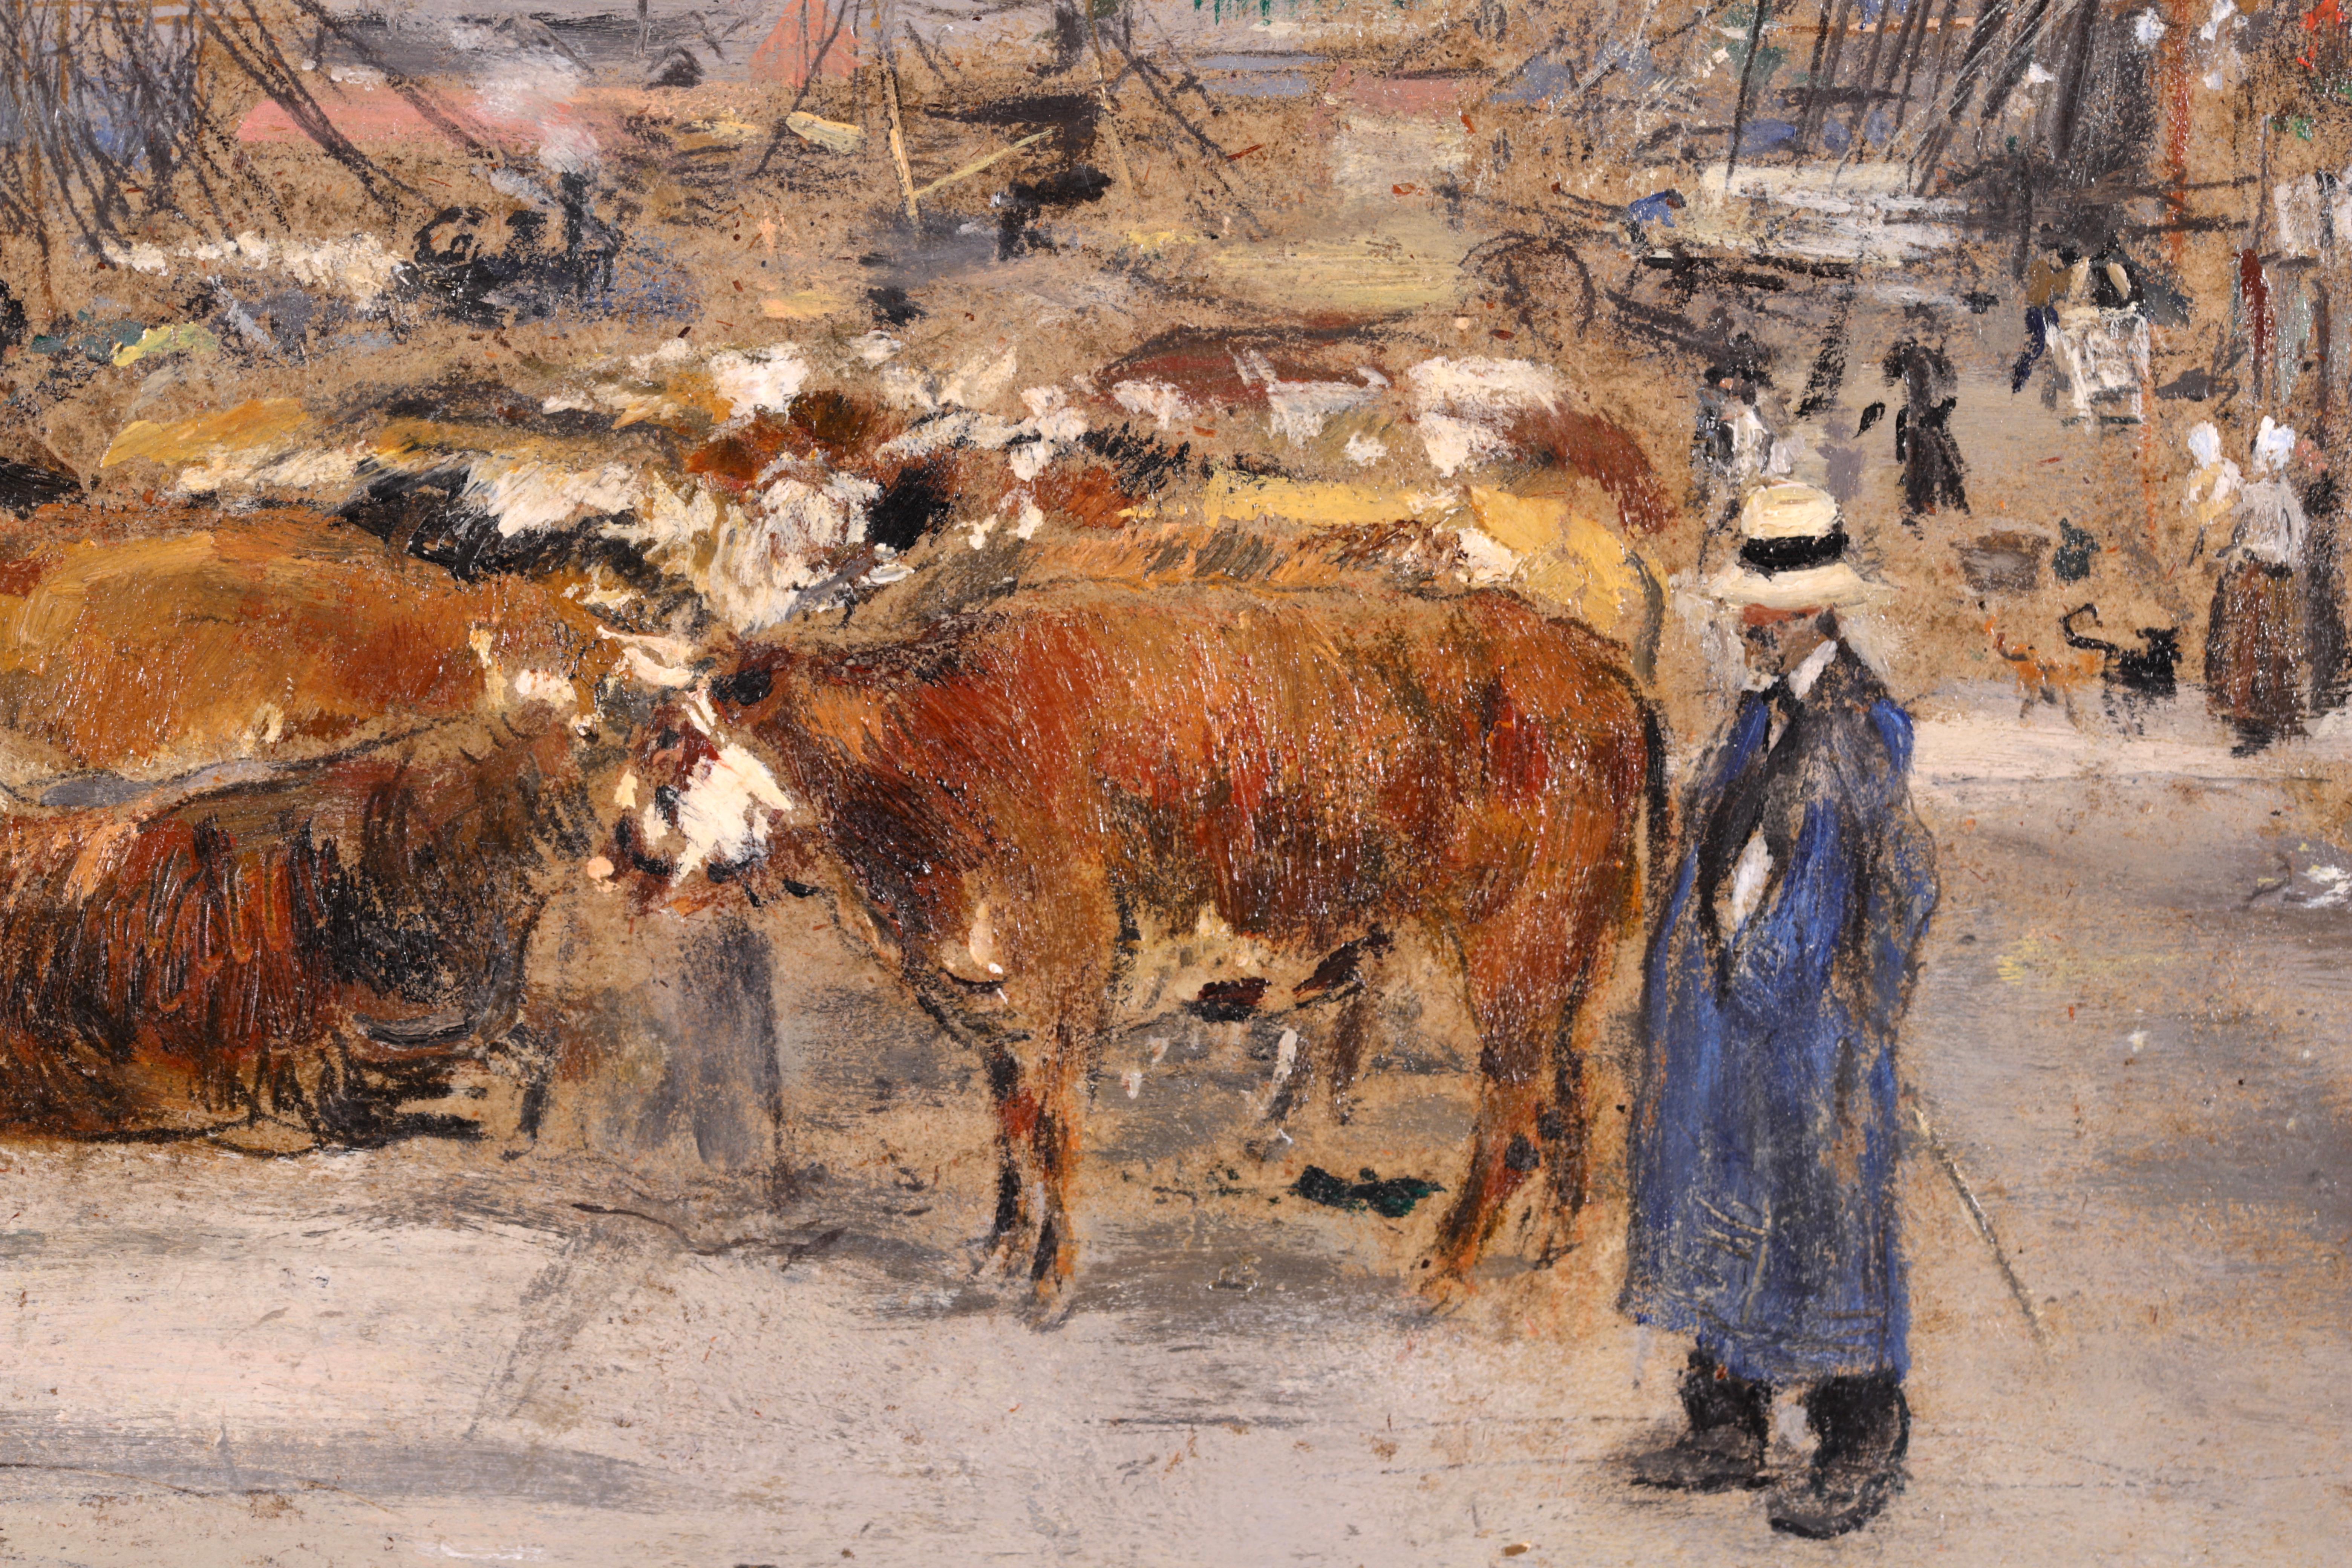 Wonderful signed oil on panel cattle and figures in landscape by French impressionist painter Jean-Francois Raffaelli. The work depicts oxen being loaded onto ships in Honfleur, France en route to England. 

Signature:
Signed lower